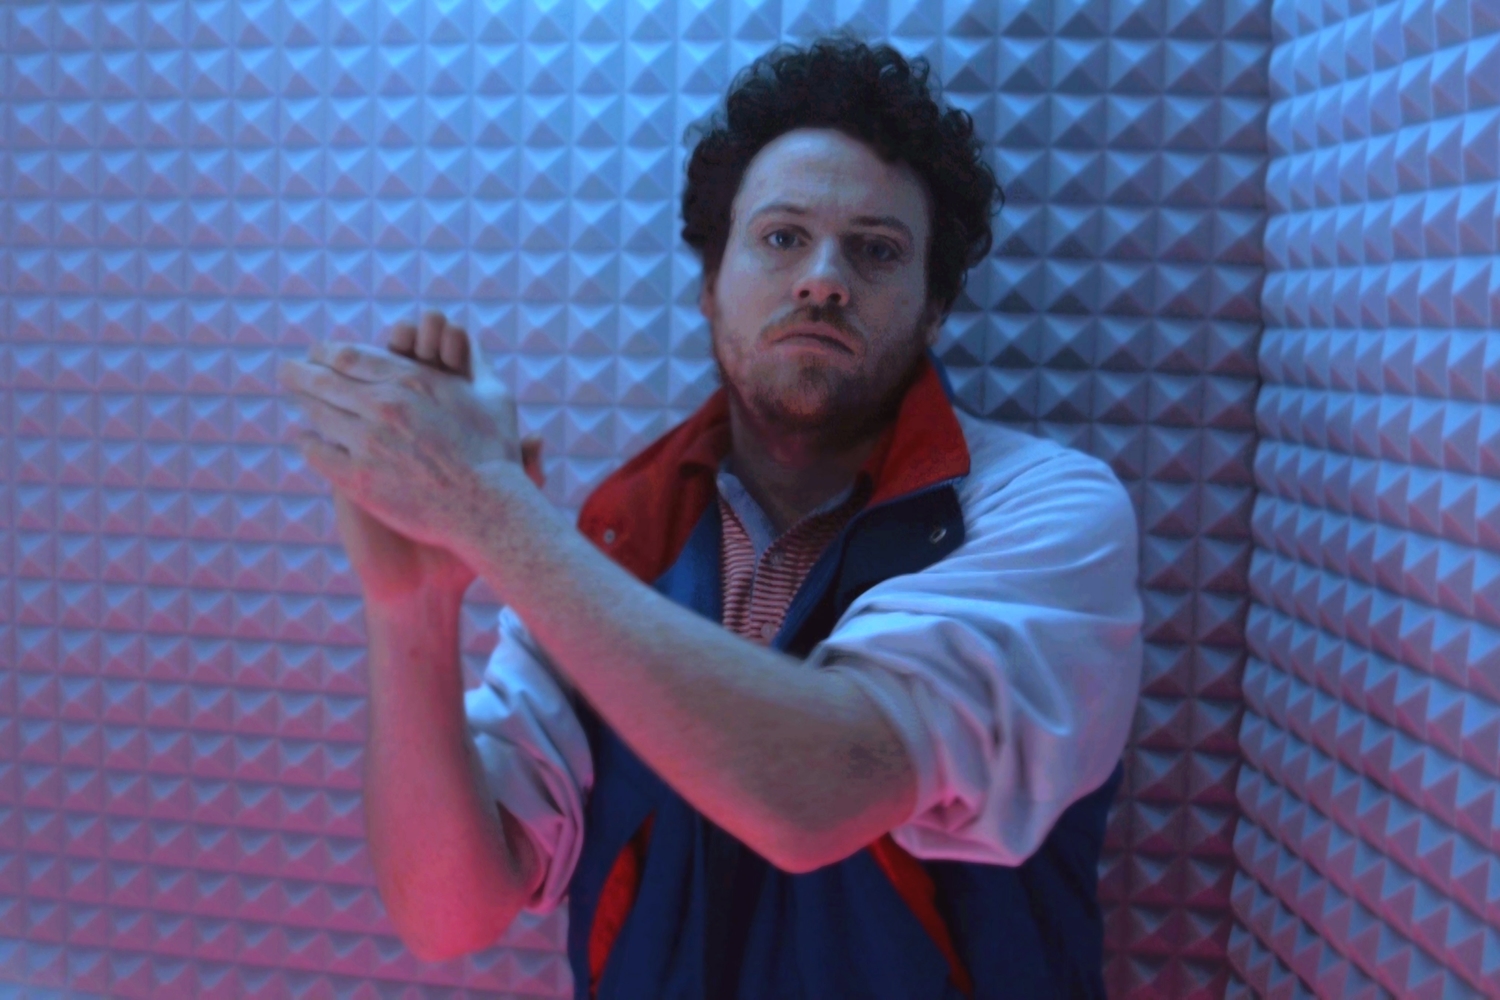 Metronomy: "I guess this album is an audio pedicure"